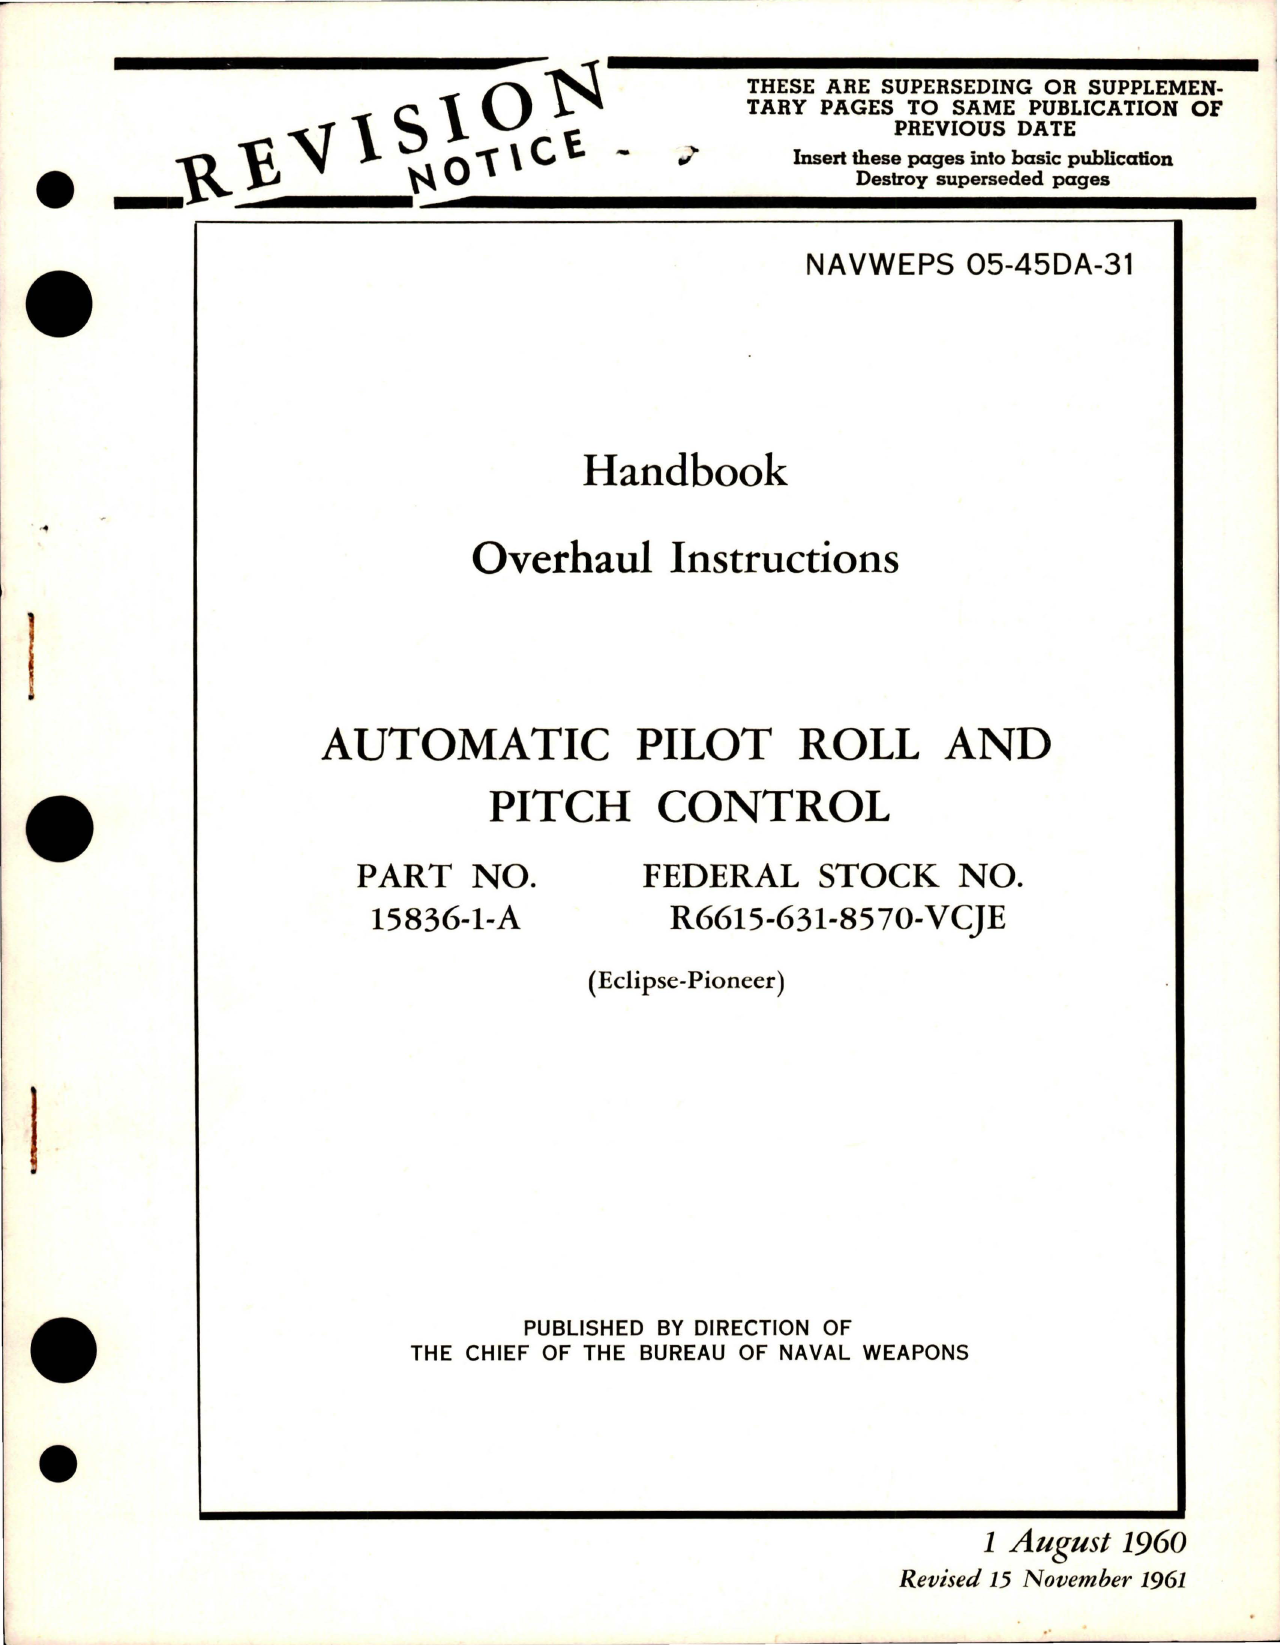 Sample page 1 from AirCorps Library document: Overhaul Instructions for Automatic Pilot Roll and Pitch Control - Part 15836-1-A